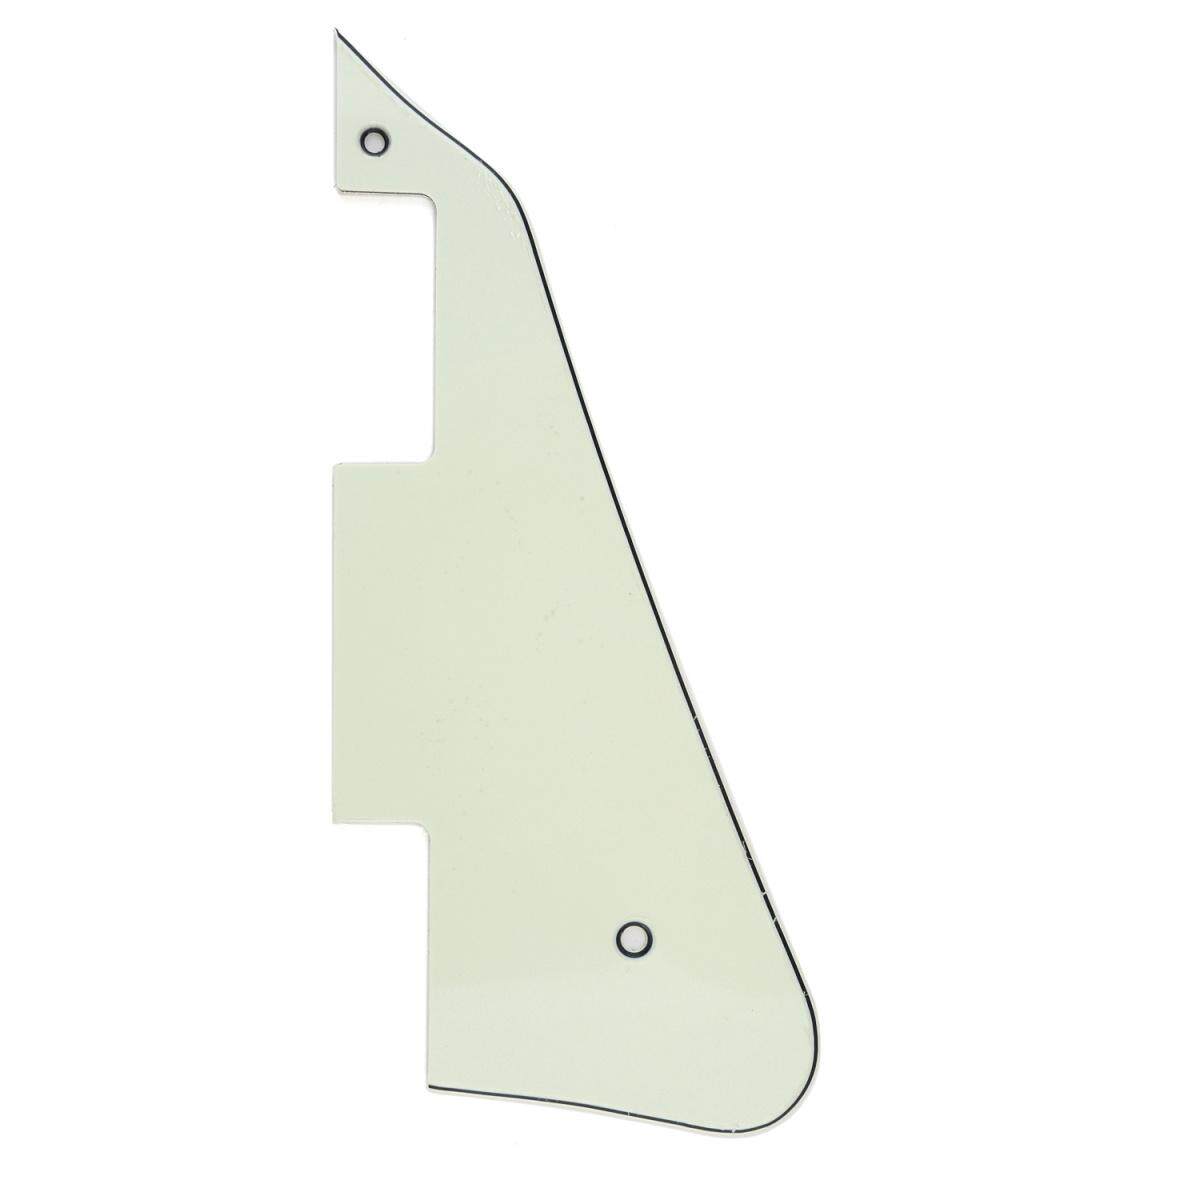 Musiclily Electric Guitar Pickguard for Gibson Les Paul Modern Style สี งาช้าง